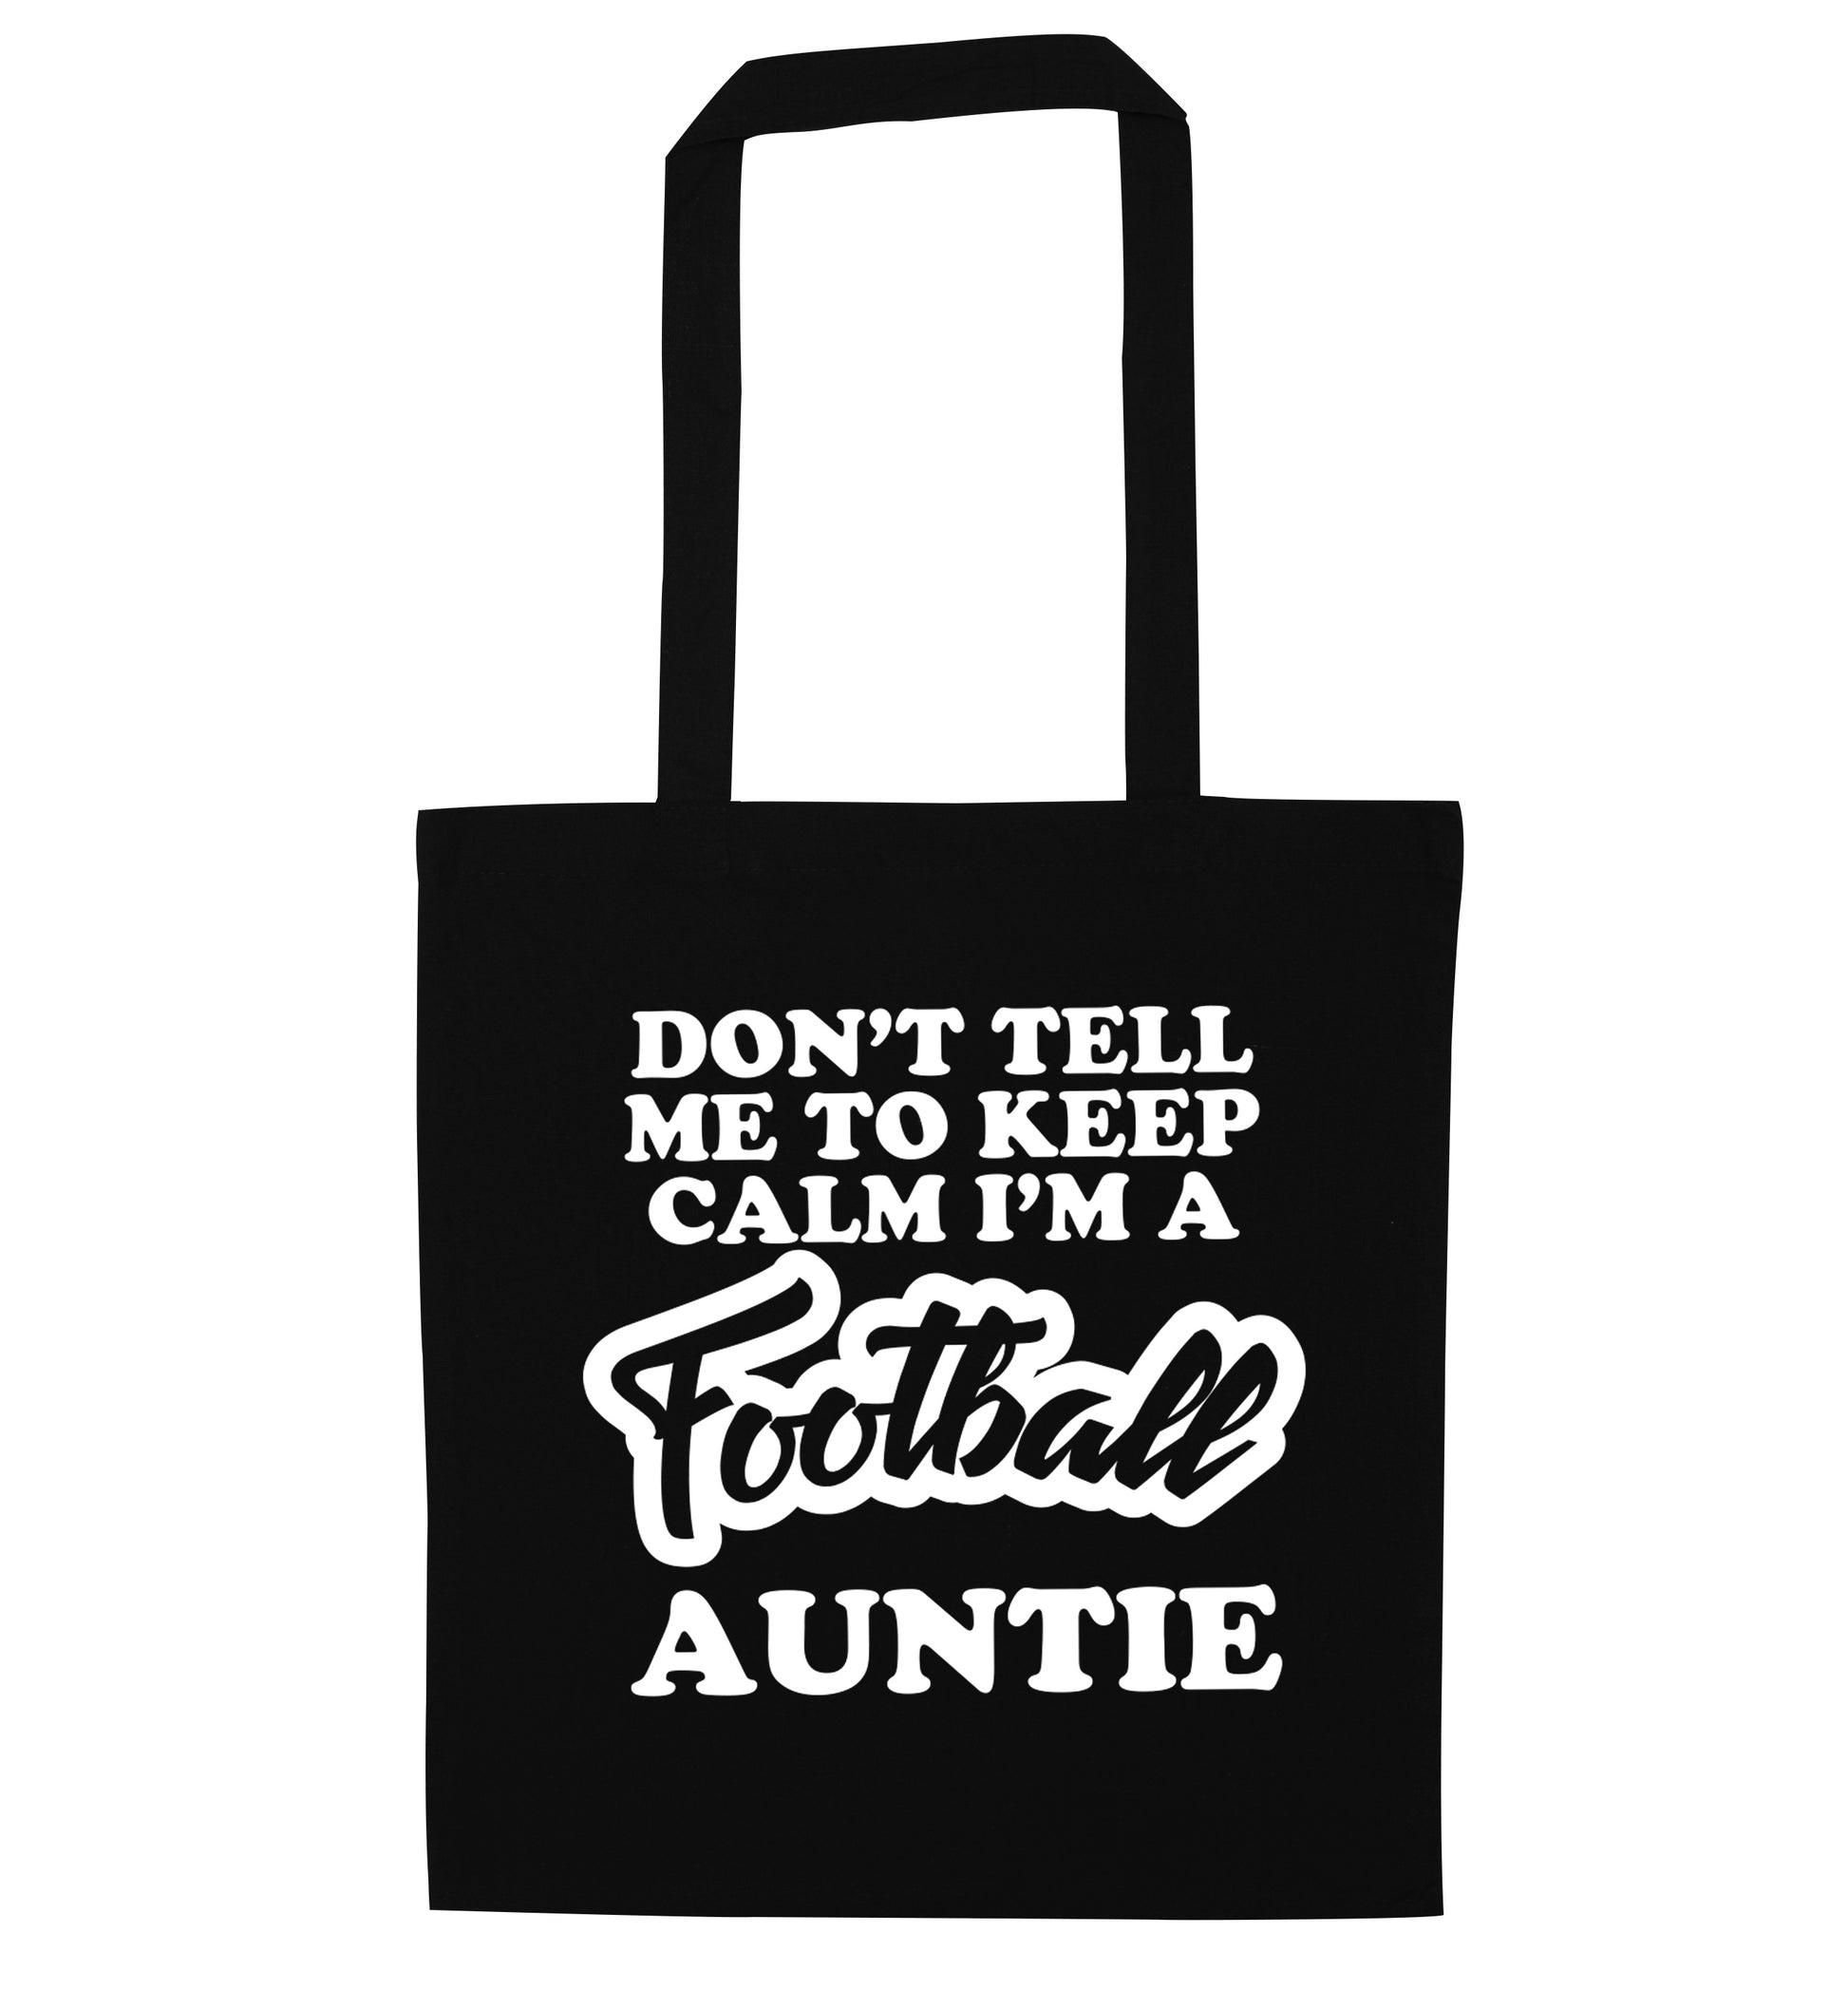 Don't tell me to keep calm I'm a football auntie black tote bag